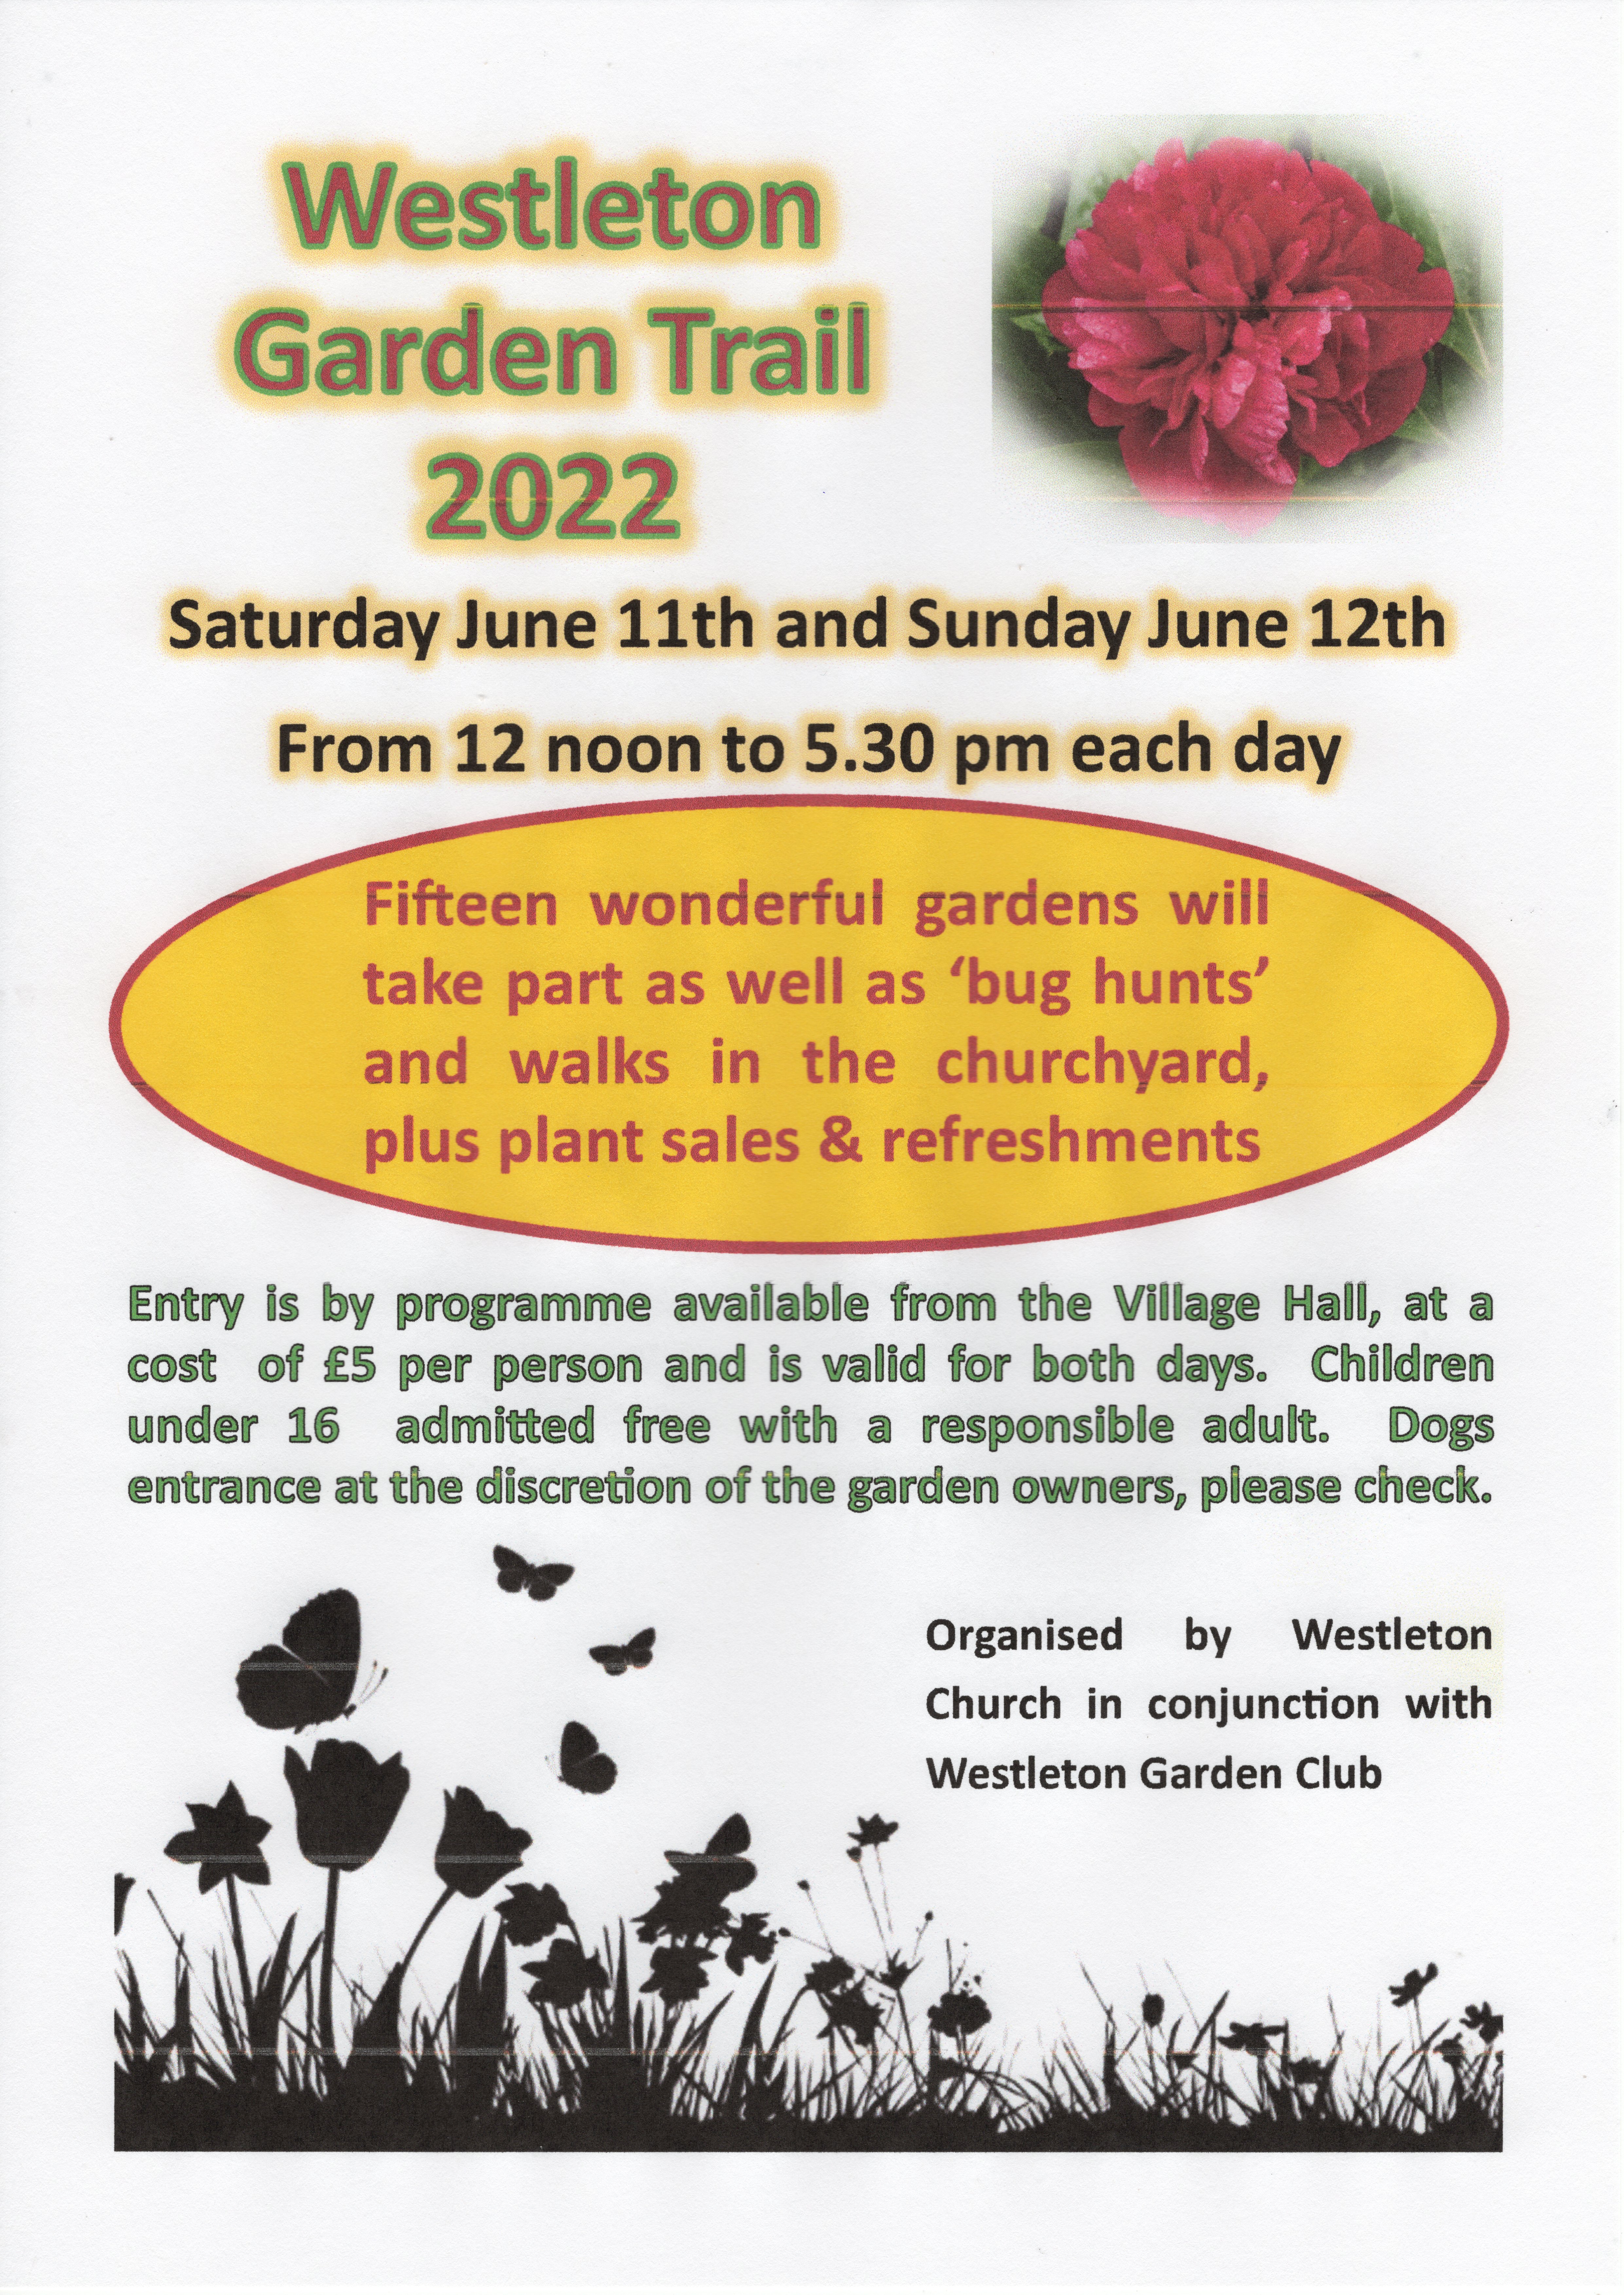 Westleton Garden Trail 2022   Saturday June 11th and Sunday June 12th  From 12 noon to 5.30 pm each day     Fifteen wonderful gardens will take part as well as ‘bug hunts’ and walks in the churchyard, plus plant sales & refreshments     Organised by Westleton Church in conjunction with Westleton Garden Club